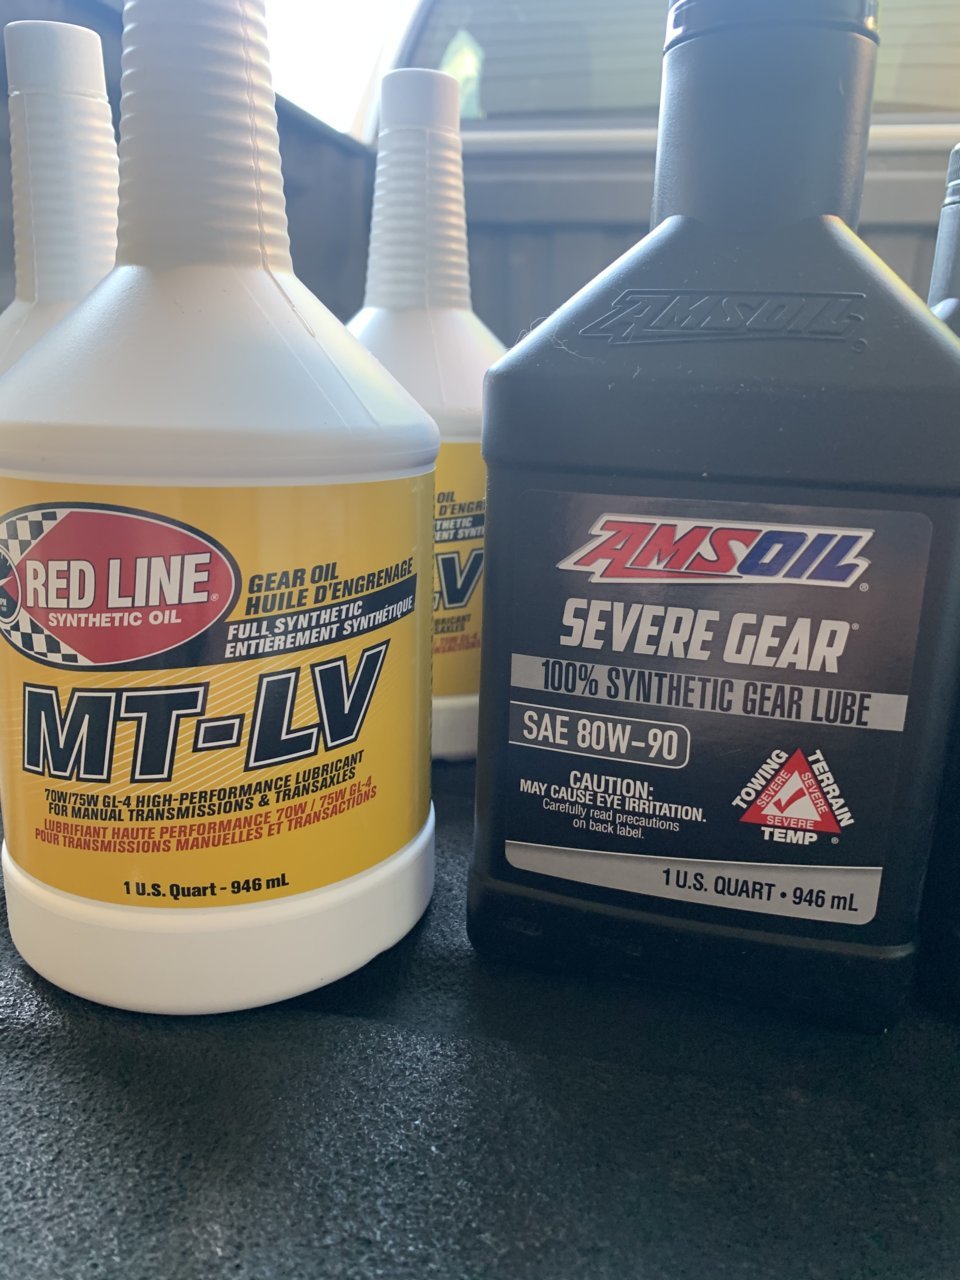 Red Line MT-LV 70W/75W Synthetic Gear Oil